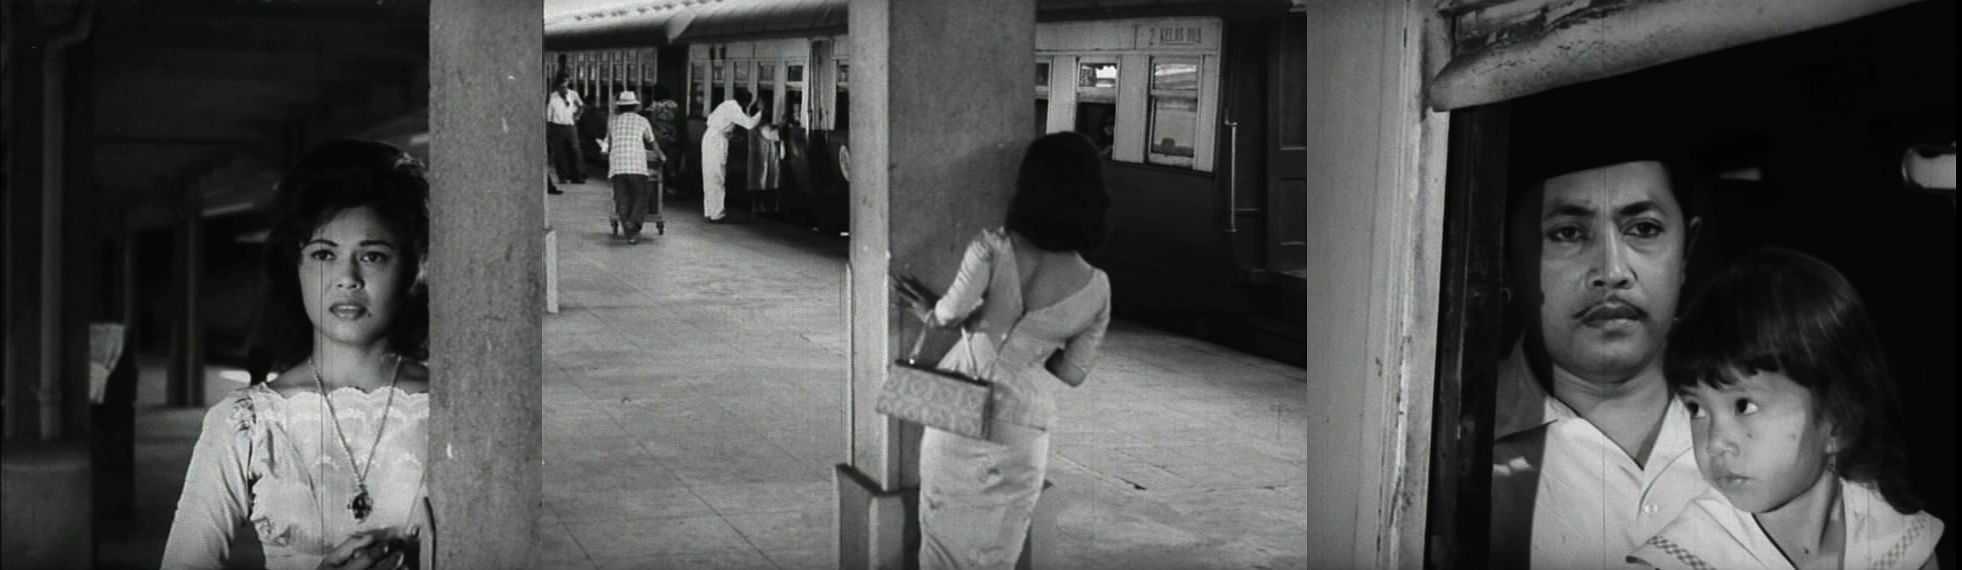 A scene from Chinta Kaseh Sayang (1965), one of the films featured on a tour of filming locations in Singapore.